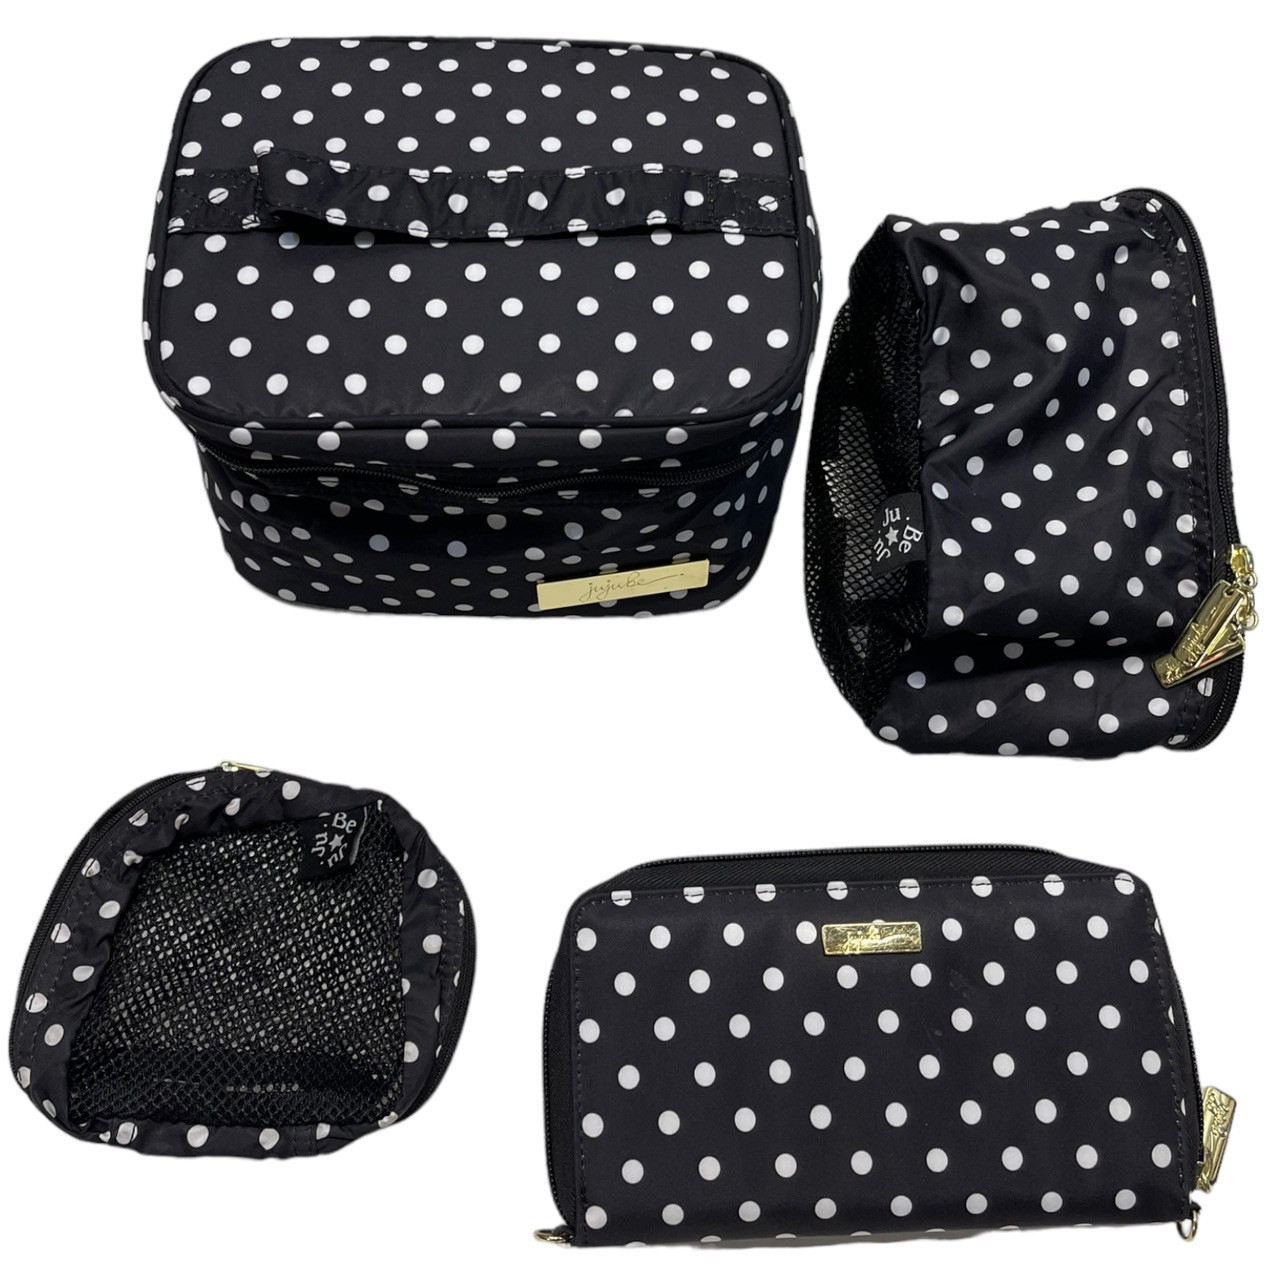 JuJuBe Black Polka Dot The Duchess Diaper Bag Accessories: Wallet , Fuel  Cell and 2 Organizer Pouches| Like New Used - One Size